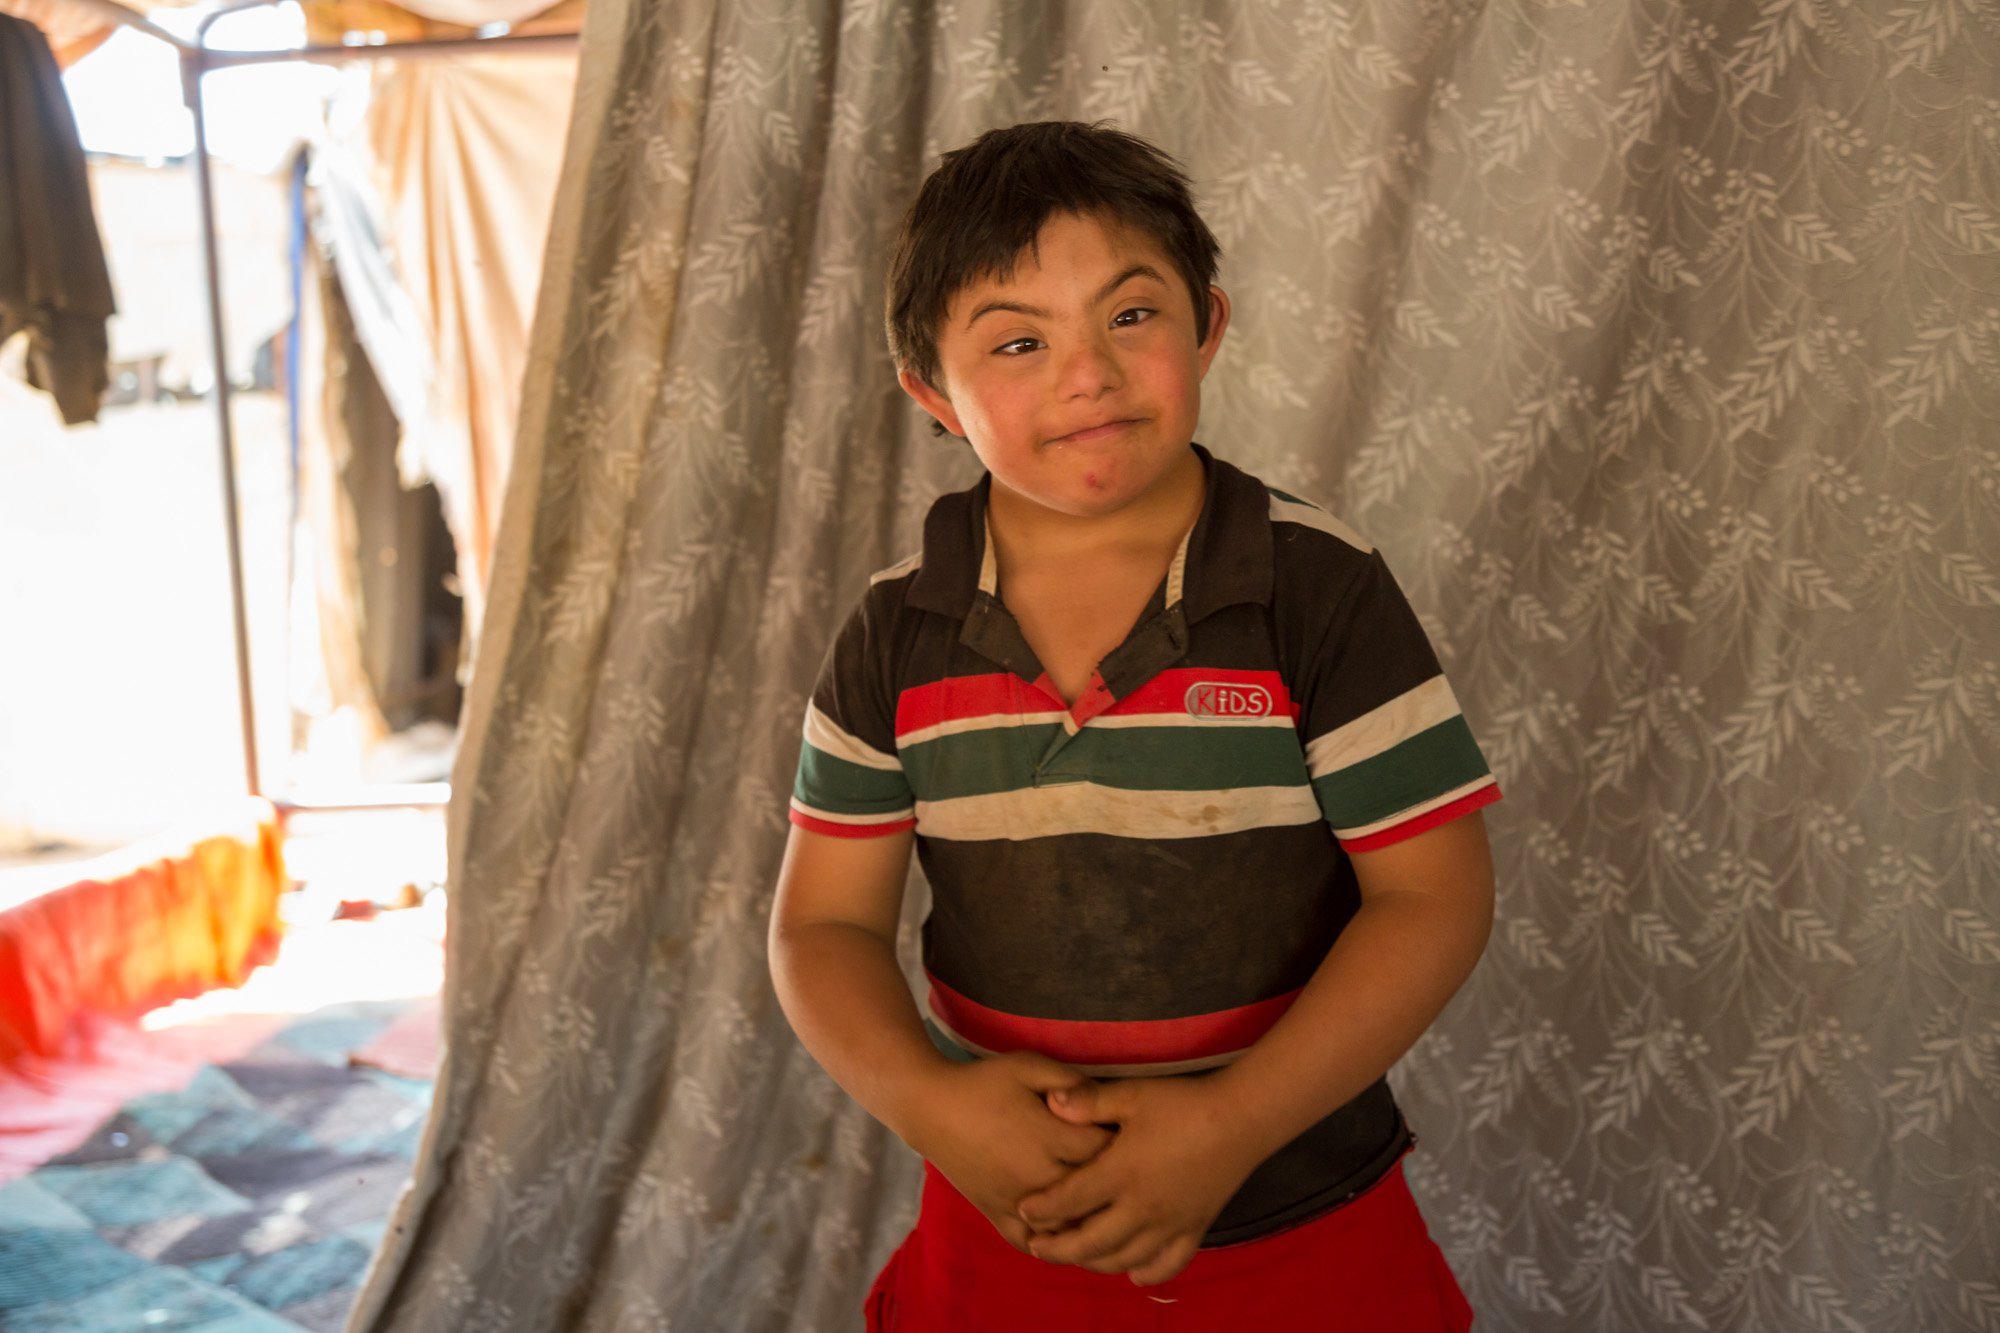 A 10-year-old Syrian refugee in Jordan with down syndrome